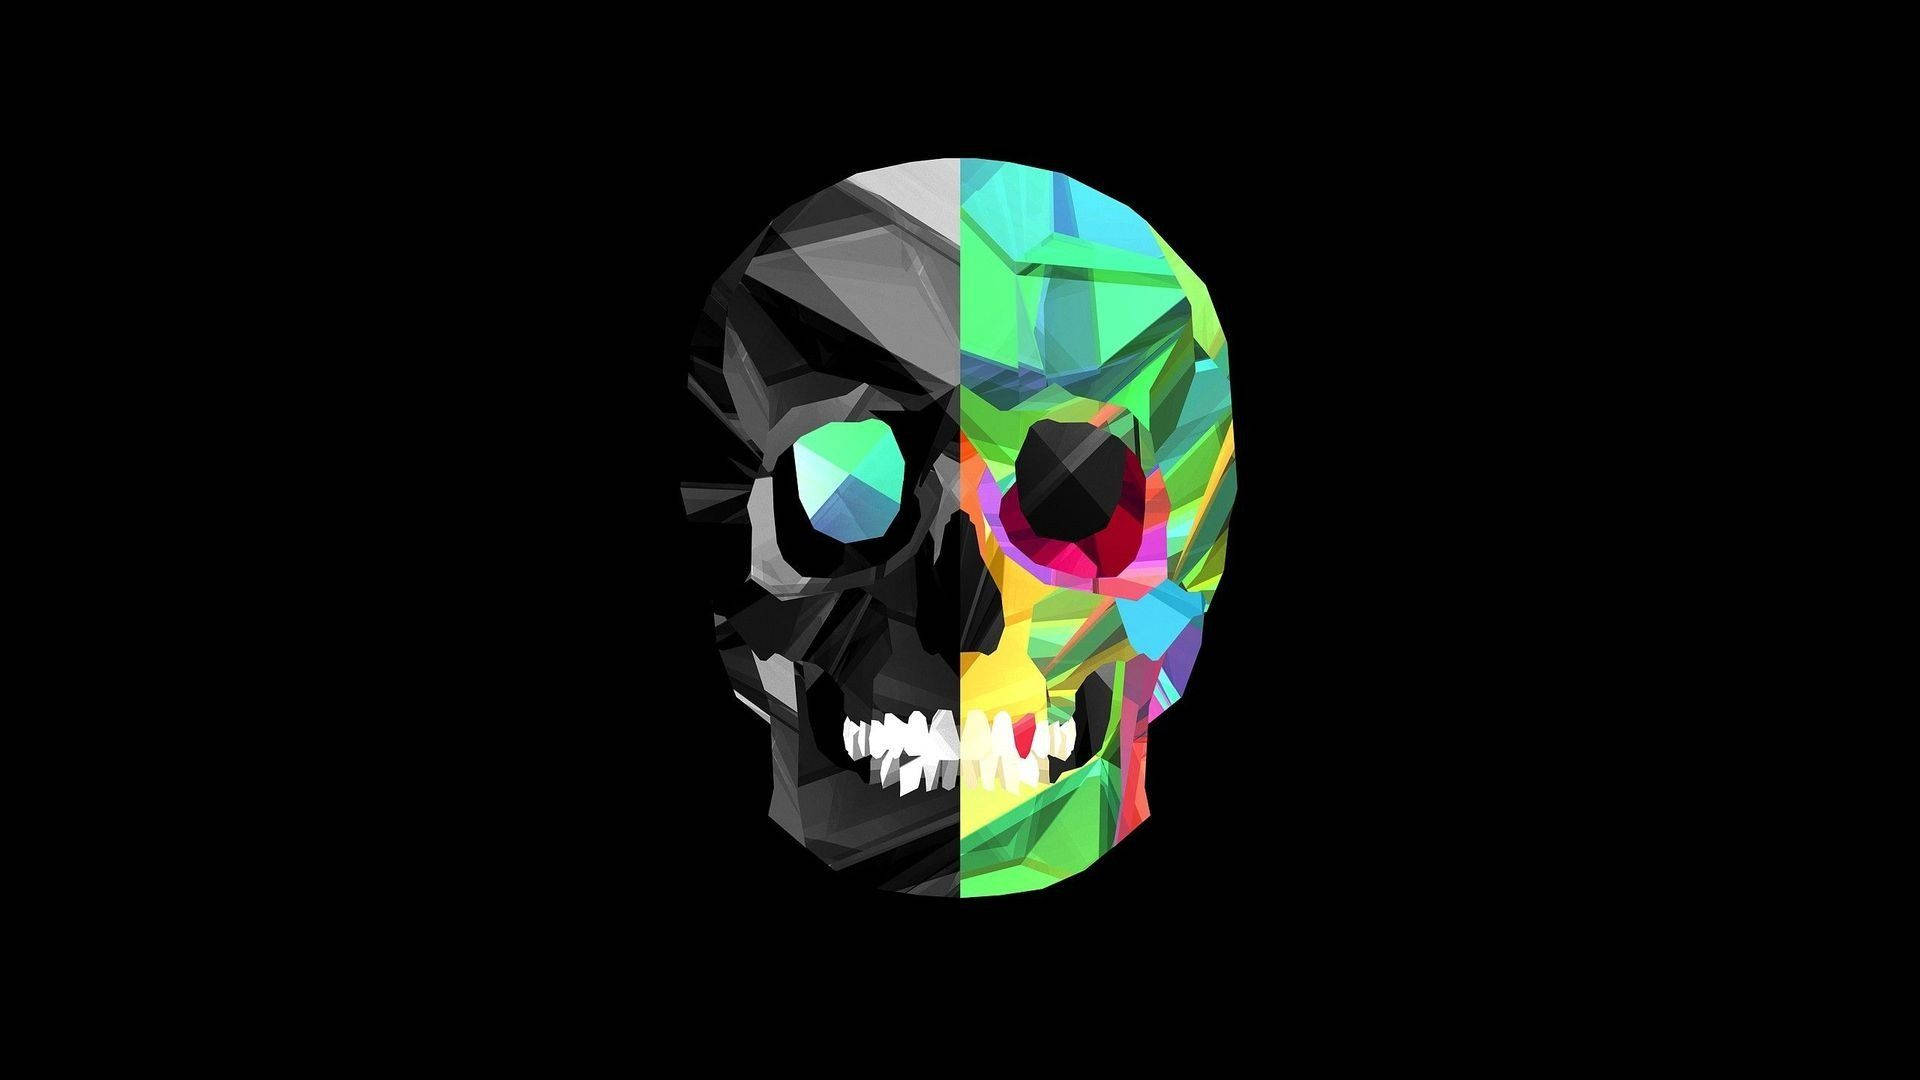 Caption: Vibrant Mexican Cubism Art Of A Skull Background